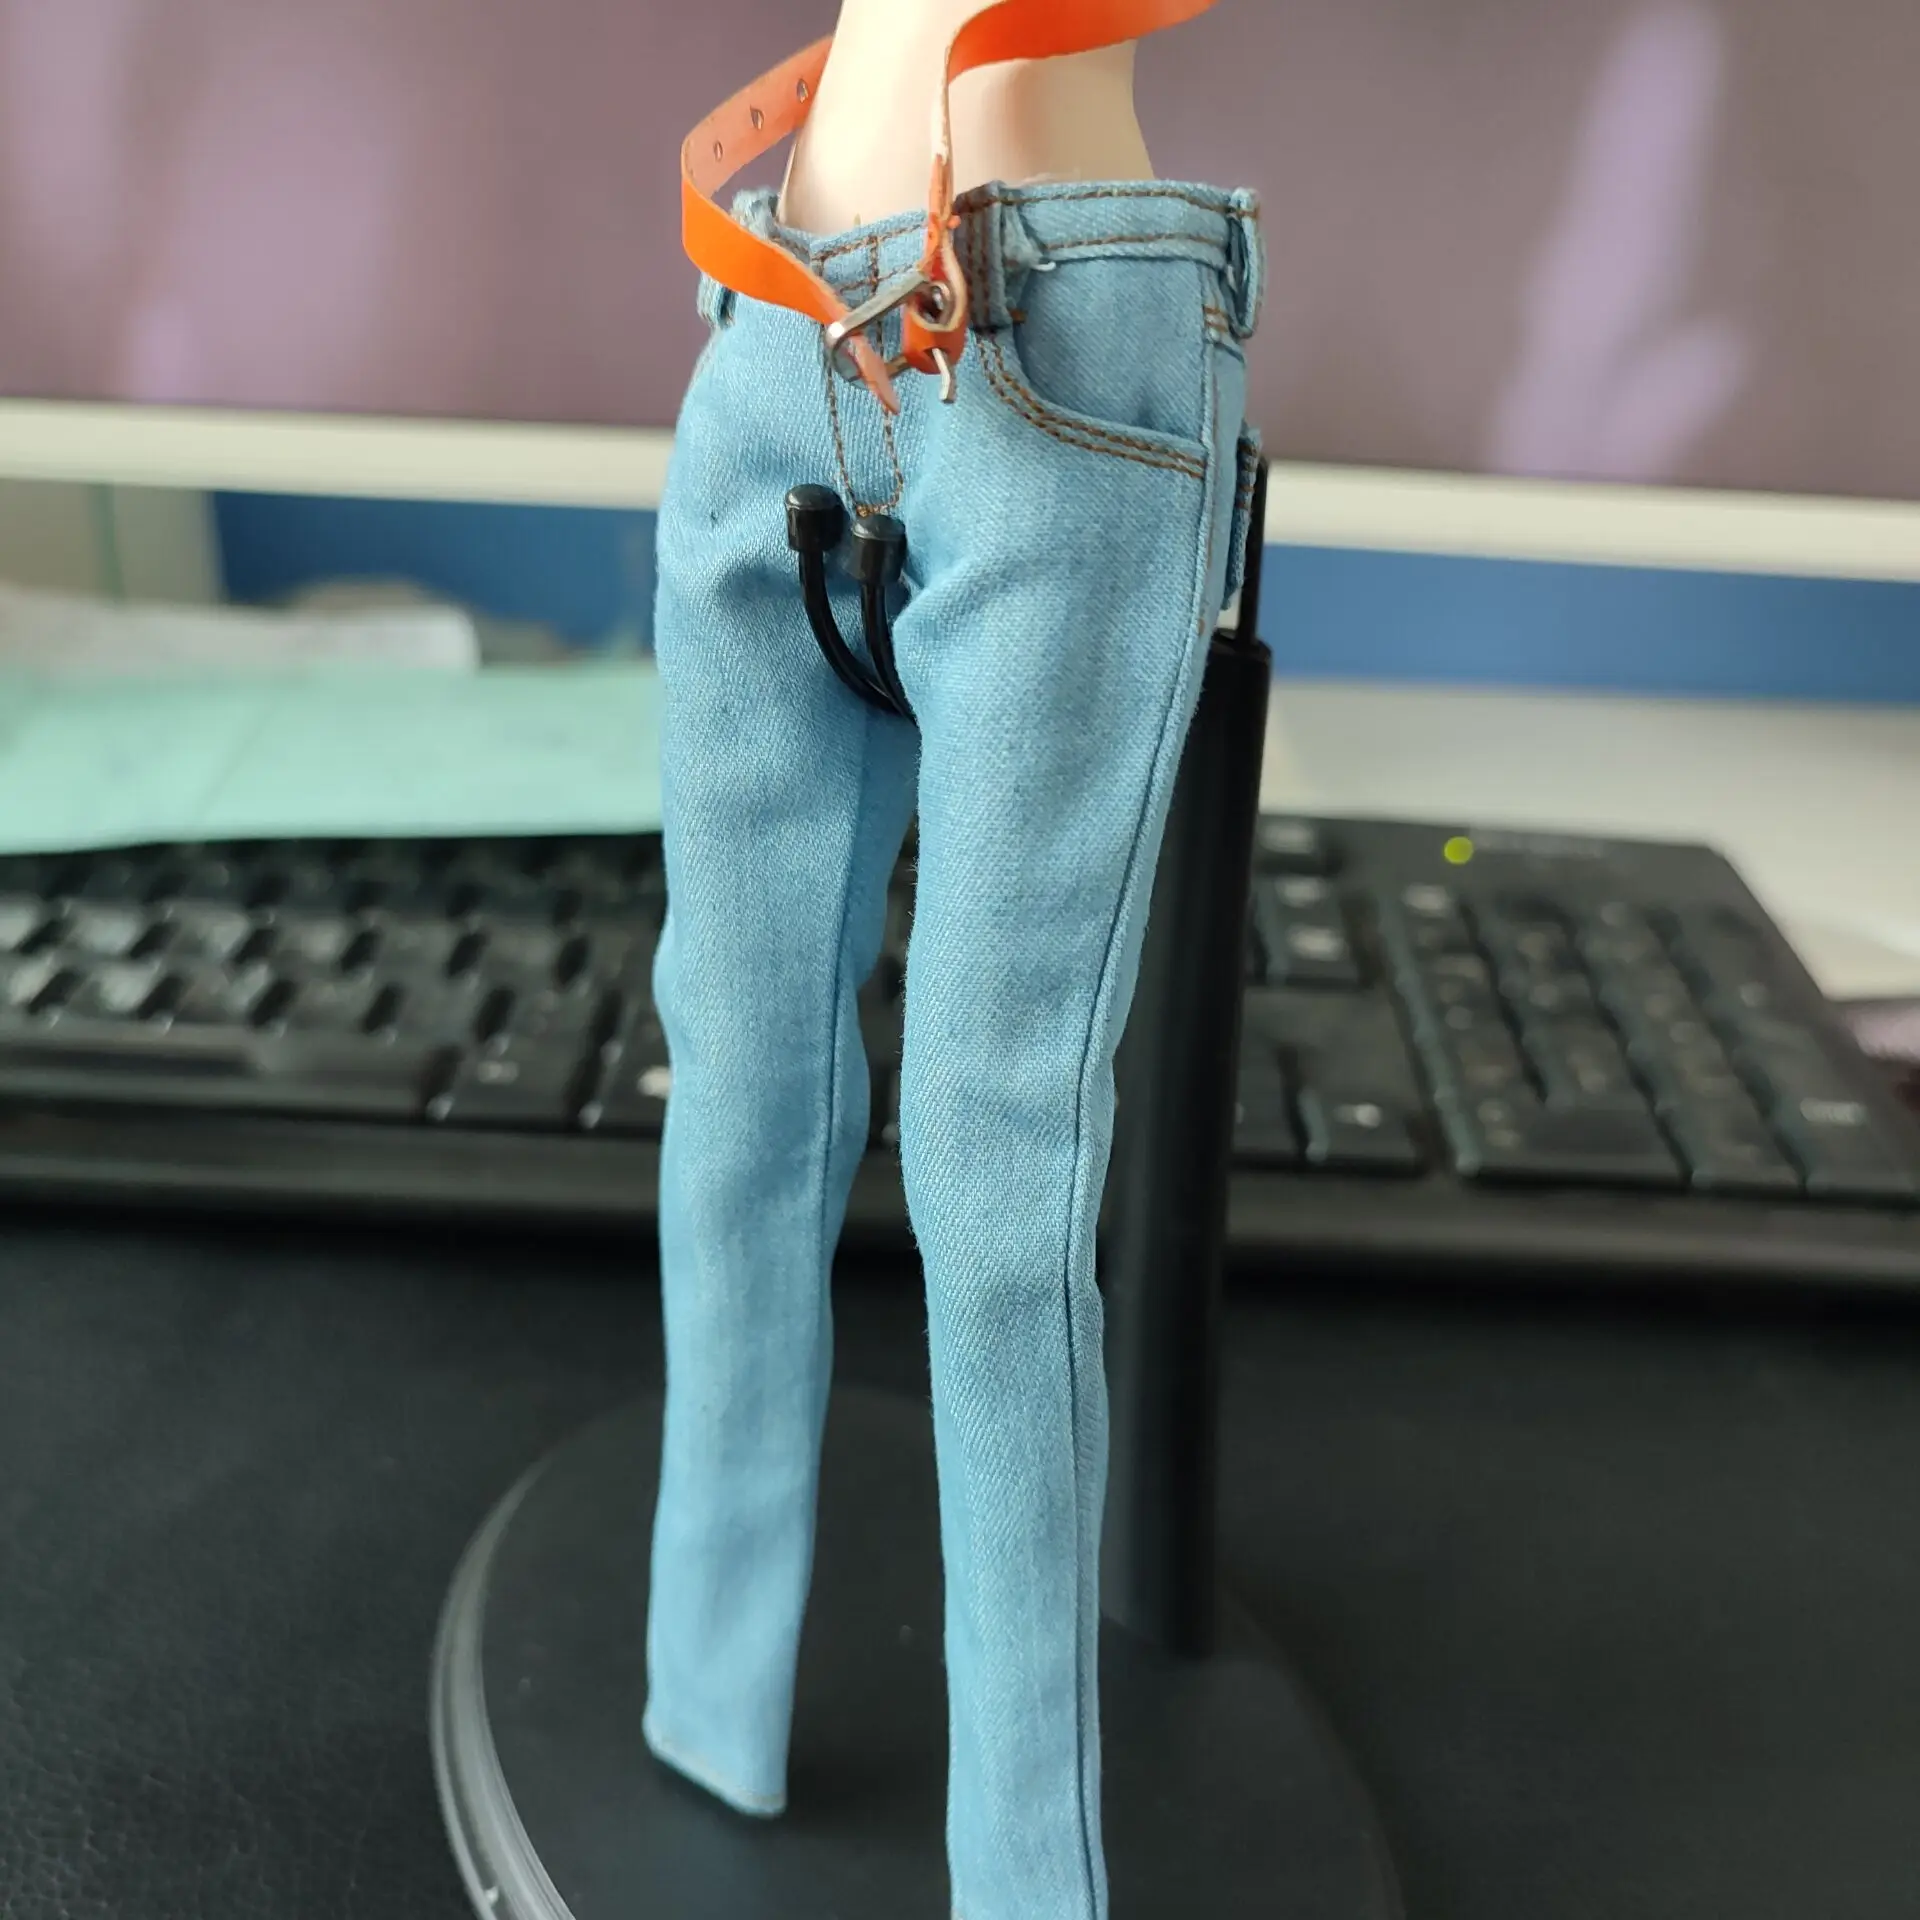 1/6 Scale Women's Clothes Annex Female skinny Jeans Tight CF001 A/B/C for  12 Inch PH Doll Jiaoudol BodyAction Figure Accessories